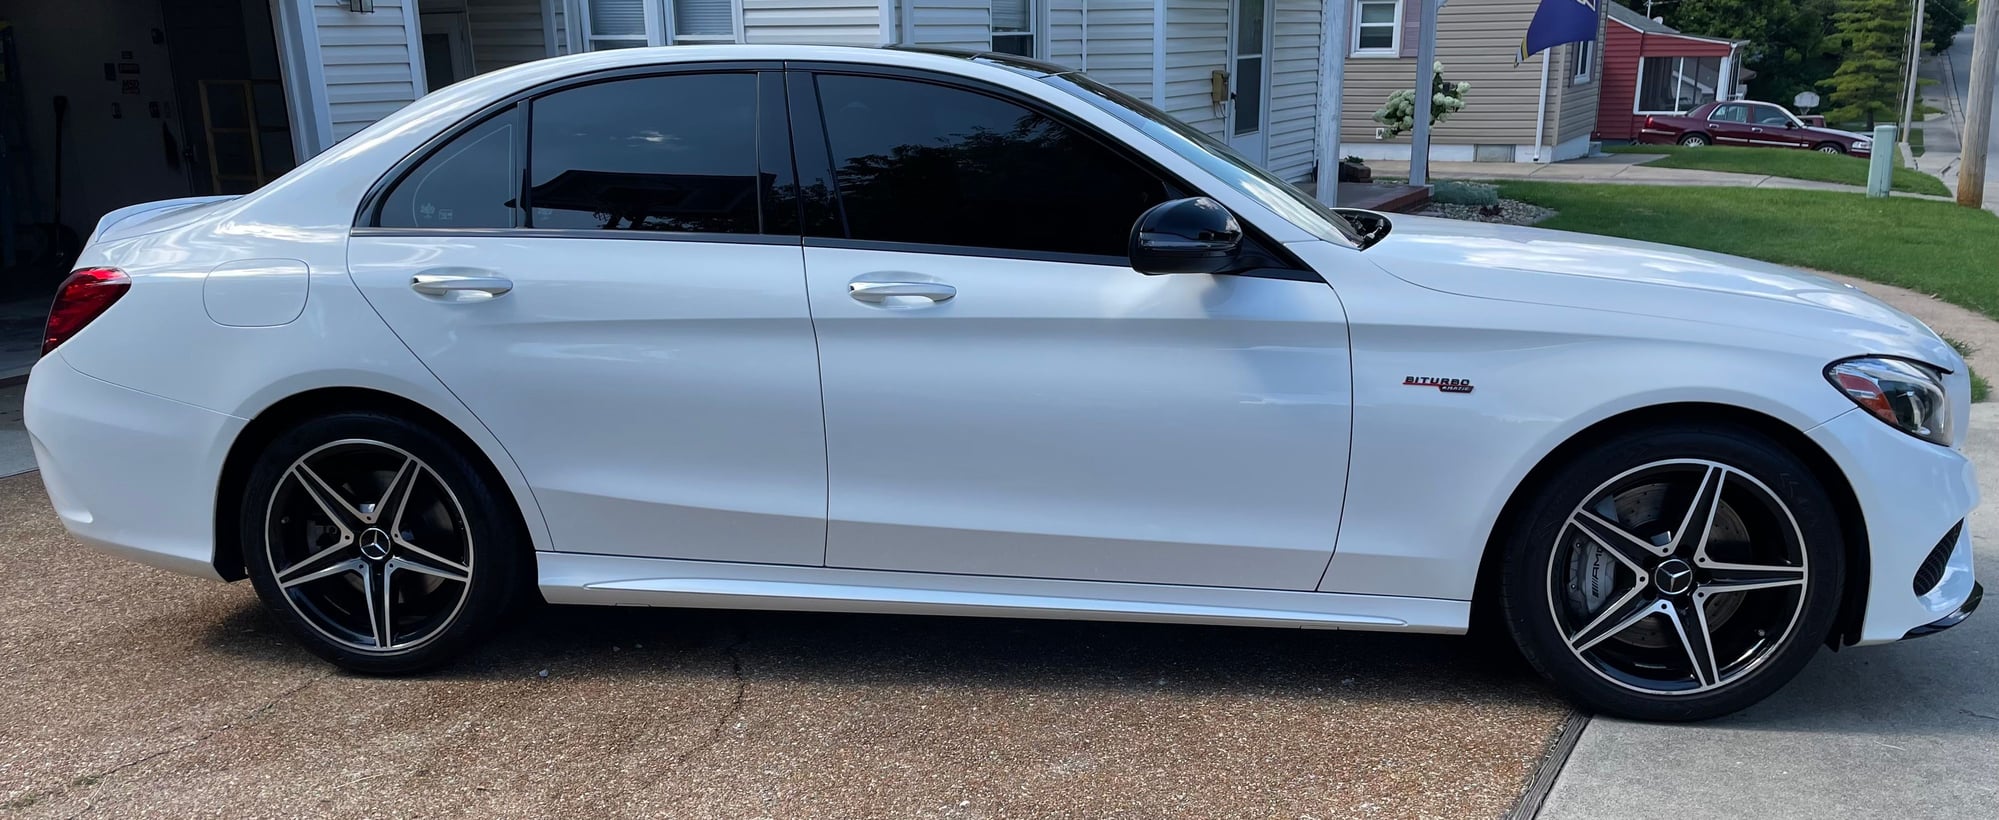 2017 Mercedes-Benz C43 AMG - 2017 C43 AMG - Used - VIN 55SWF6EB2HU215073 - 47,000 Miles - 6 cyl - AWD - Automatic - Sedan - White - Collinsville, IL 62234, United States